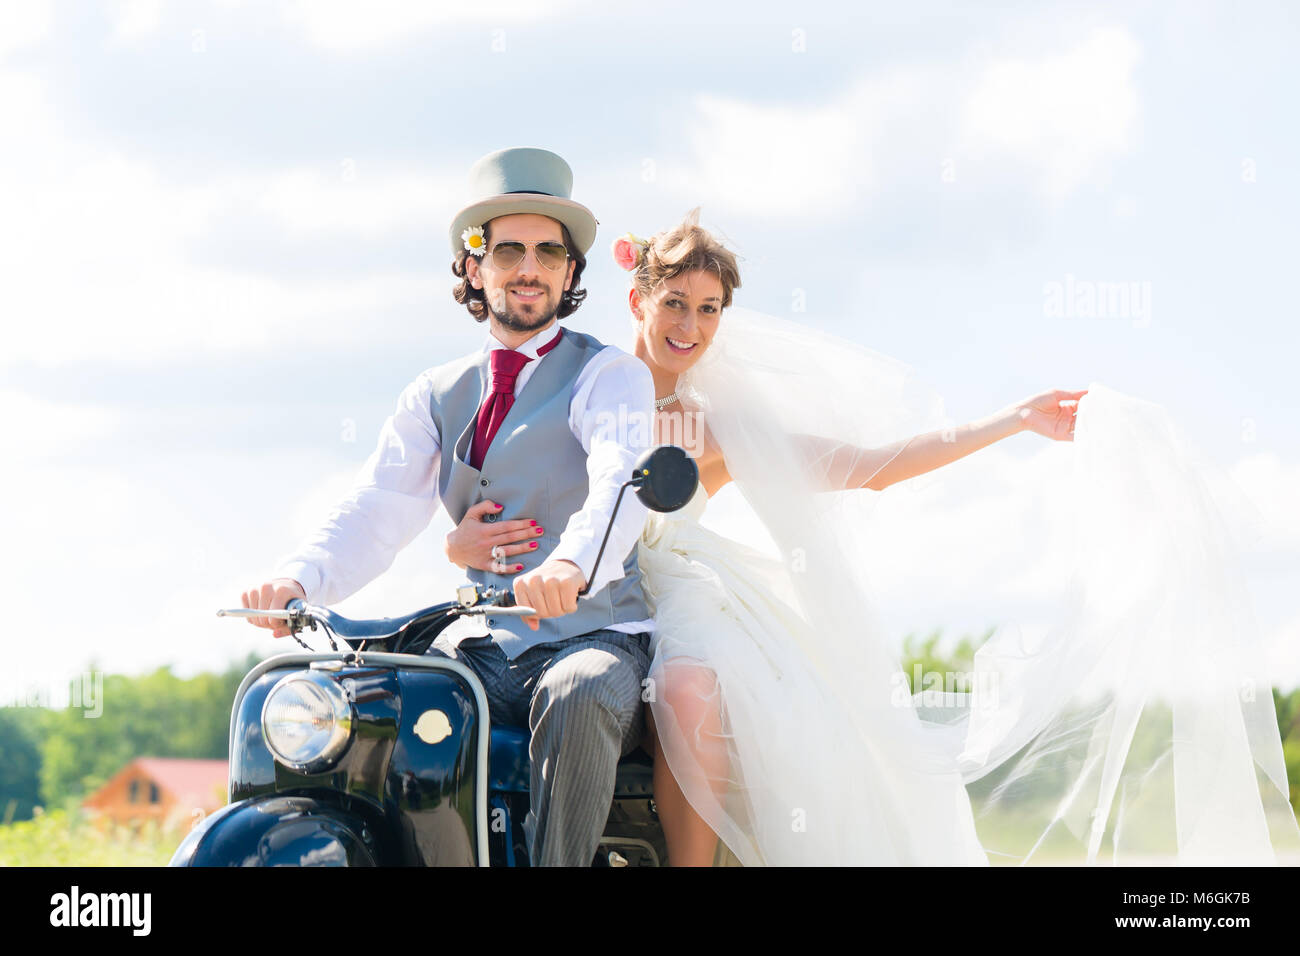 Bridal pair driving motor scooter wearing gown and suit Stock Photo